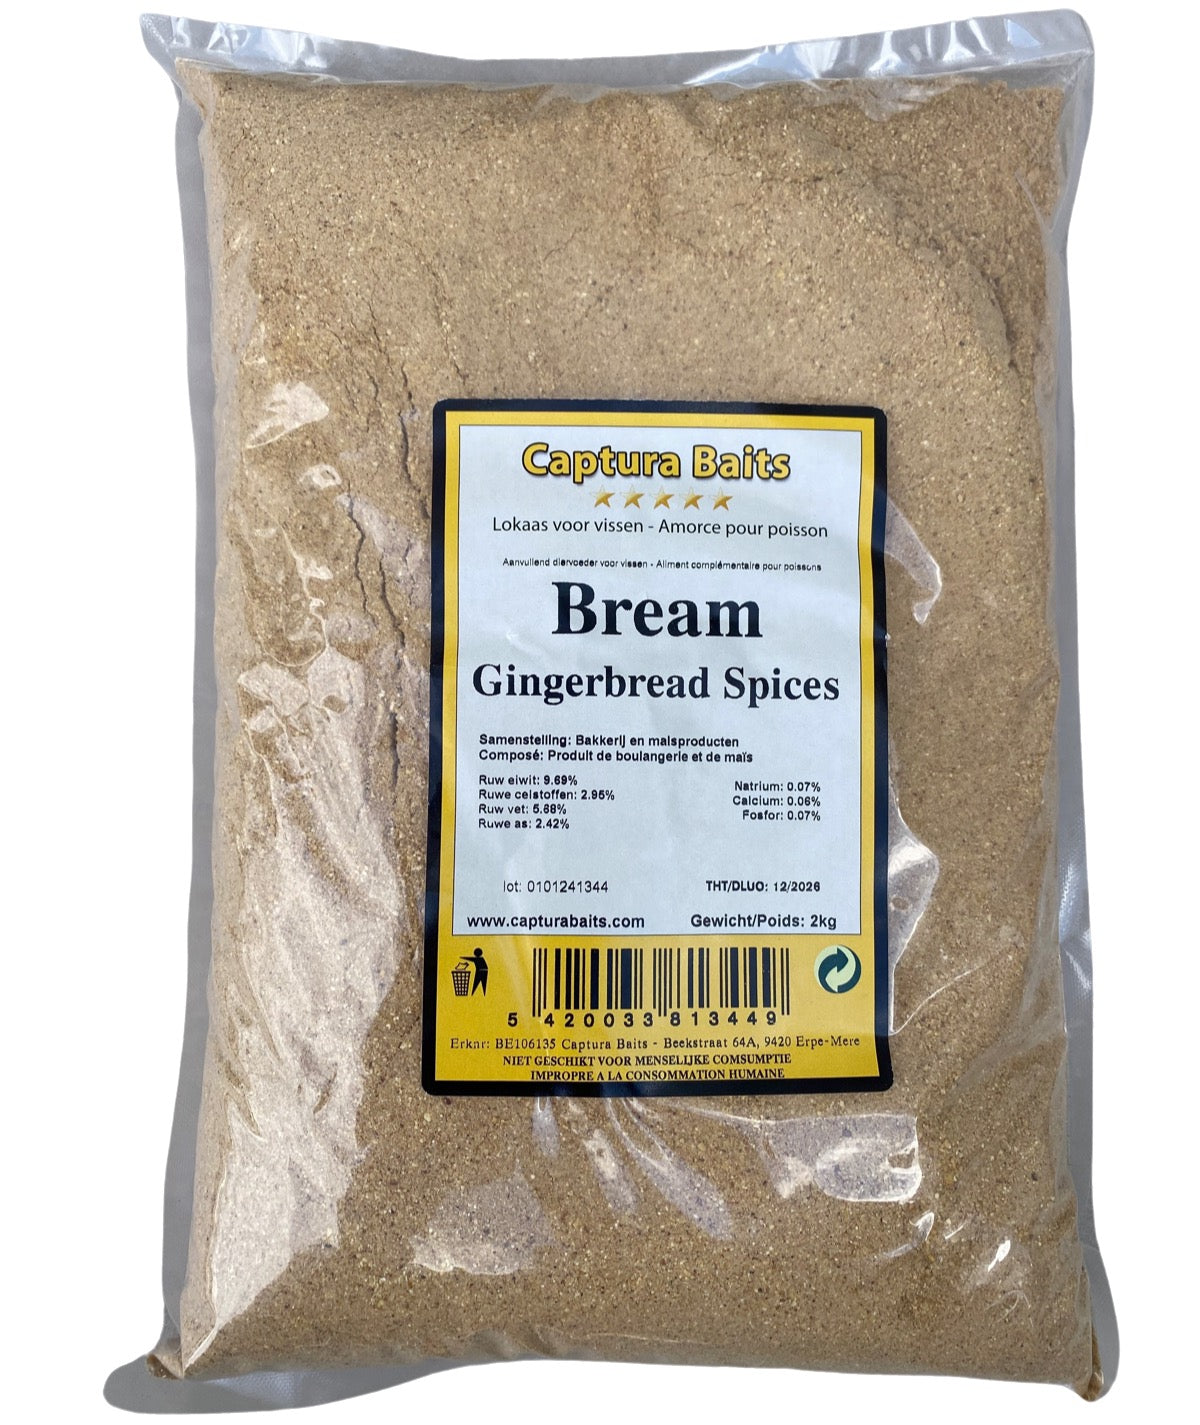 Captura Baits bream gingerbread spices